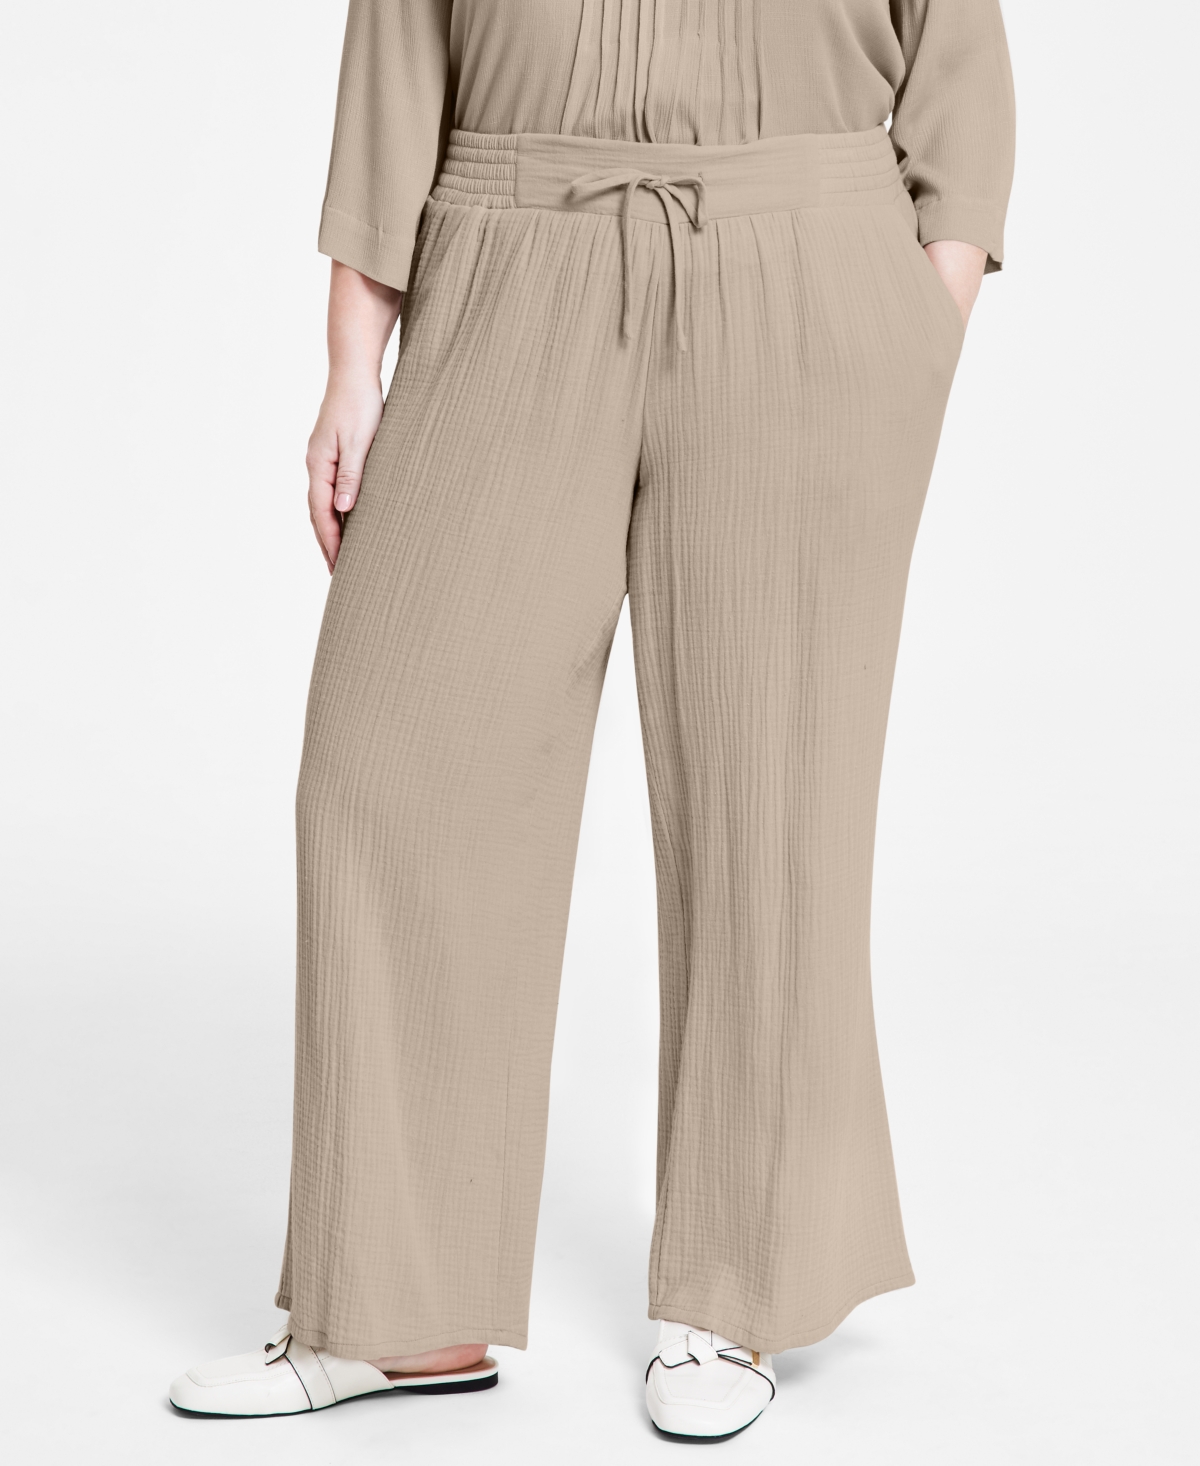 JM Collection Plus Size Gauze Drawstring Pants, Created for Macy's